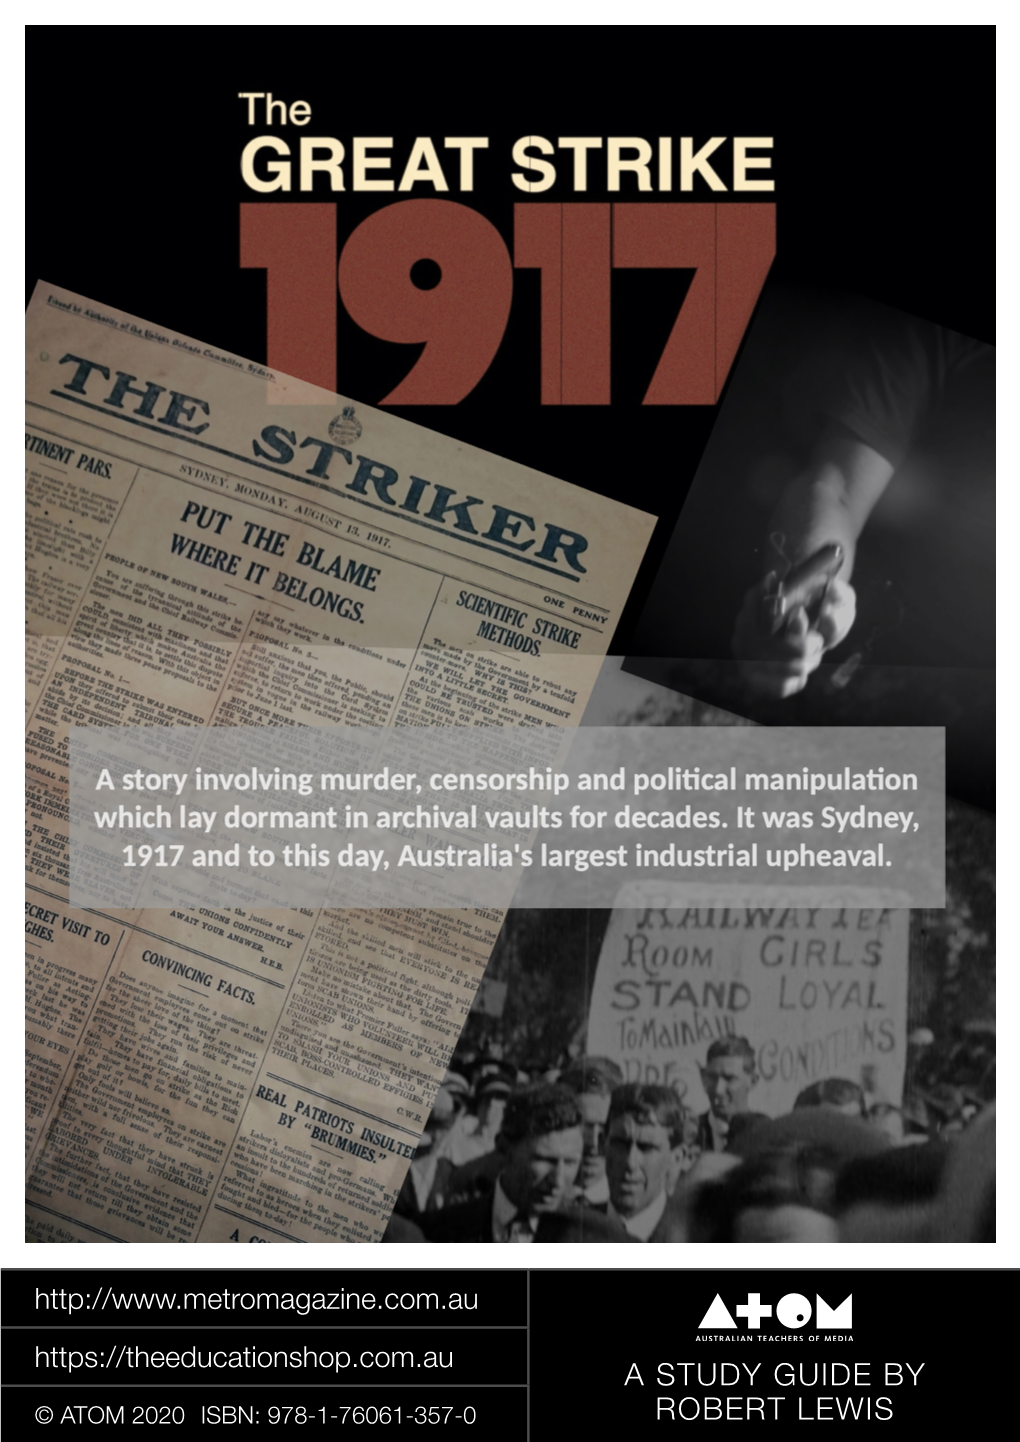 To Download the ATOM Study Guide for the GREAT STRIKE 1917